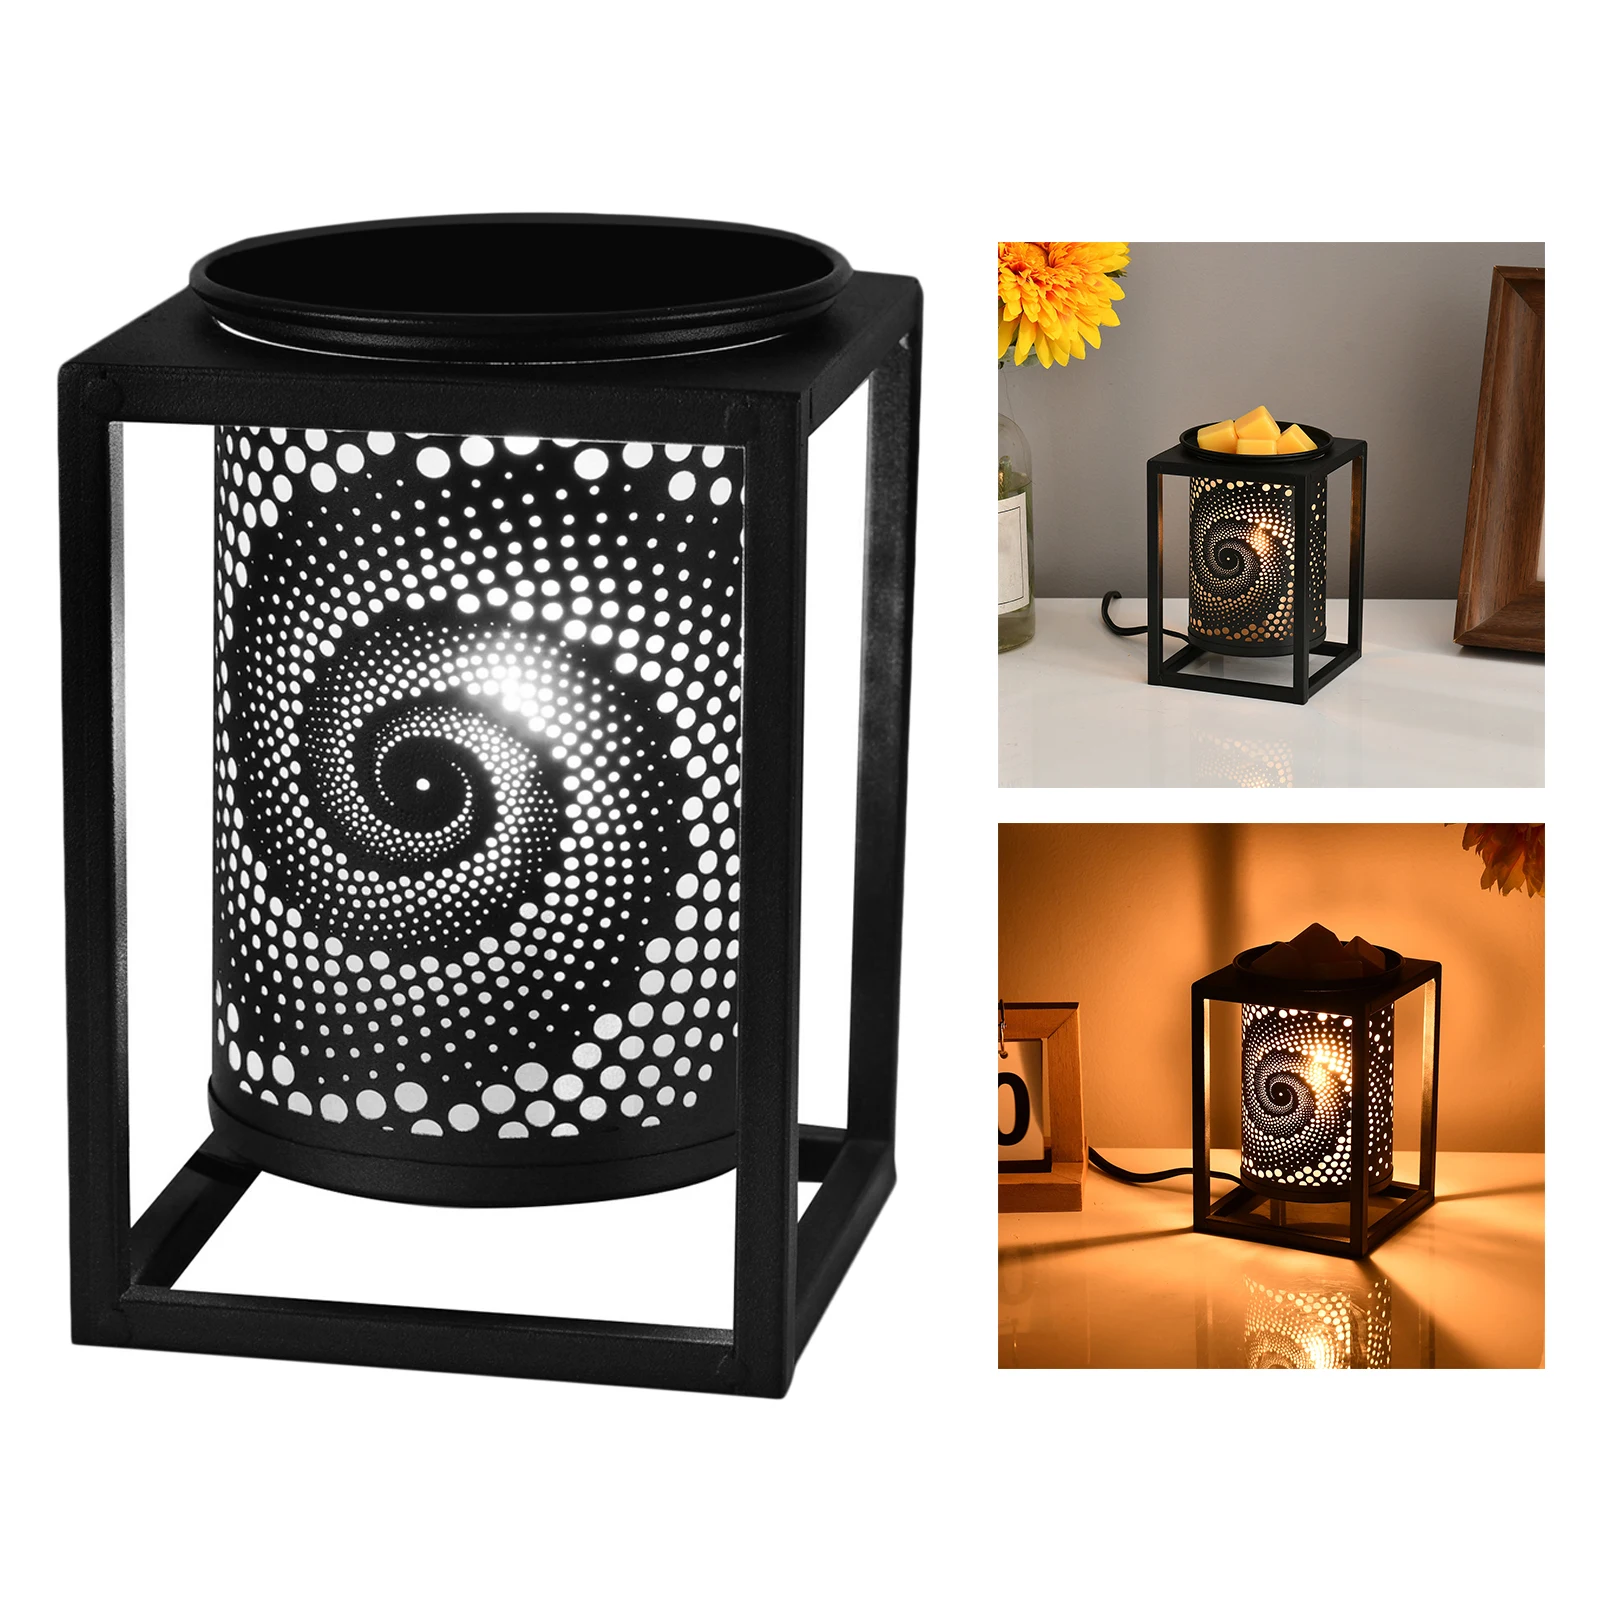 Candle Warmer Lamp Hollow Decorative Diffuser Wax Melter Mood Light Aroma Oil Burner No Flame for Melting Candles Room Spa Home